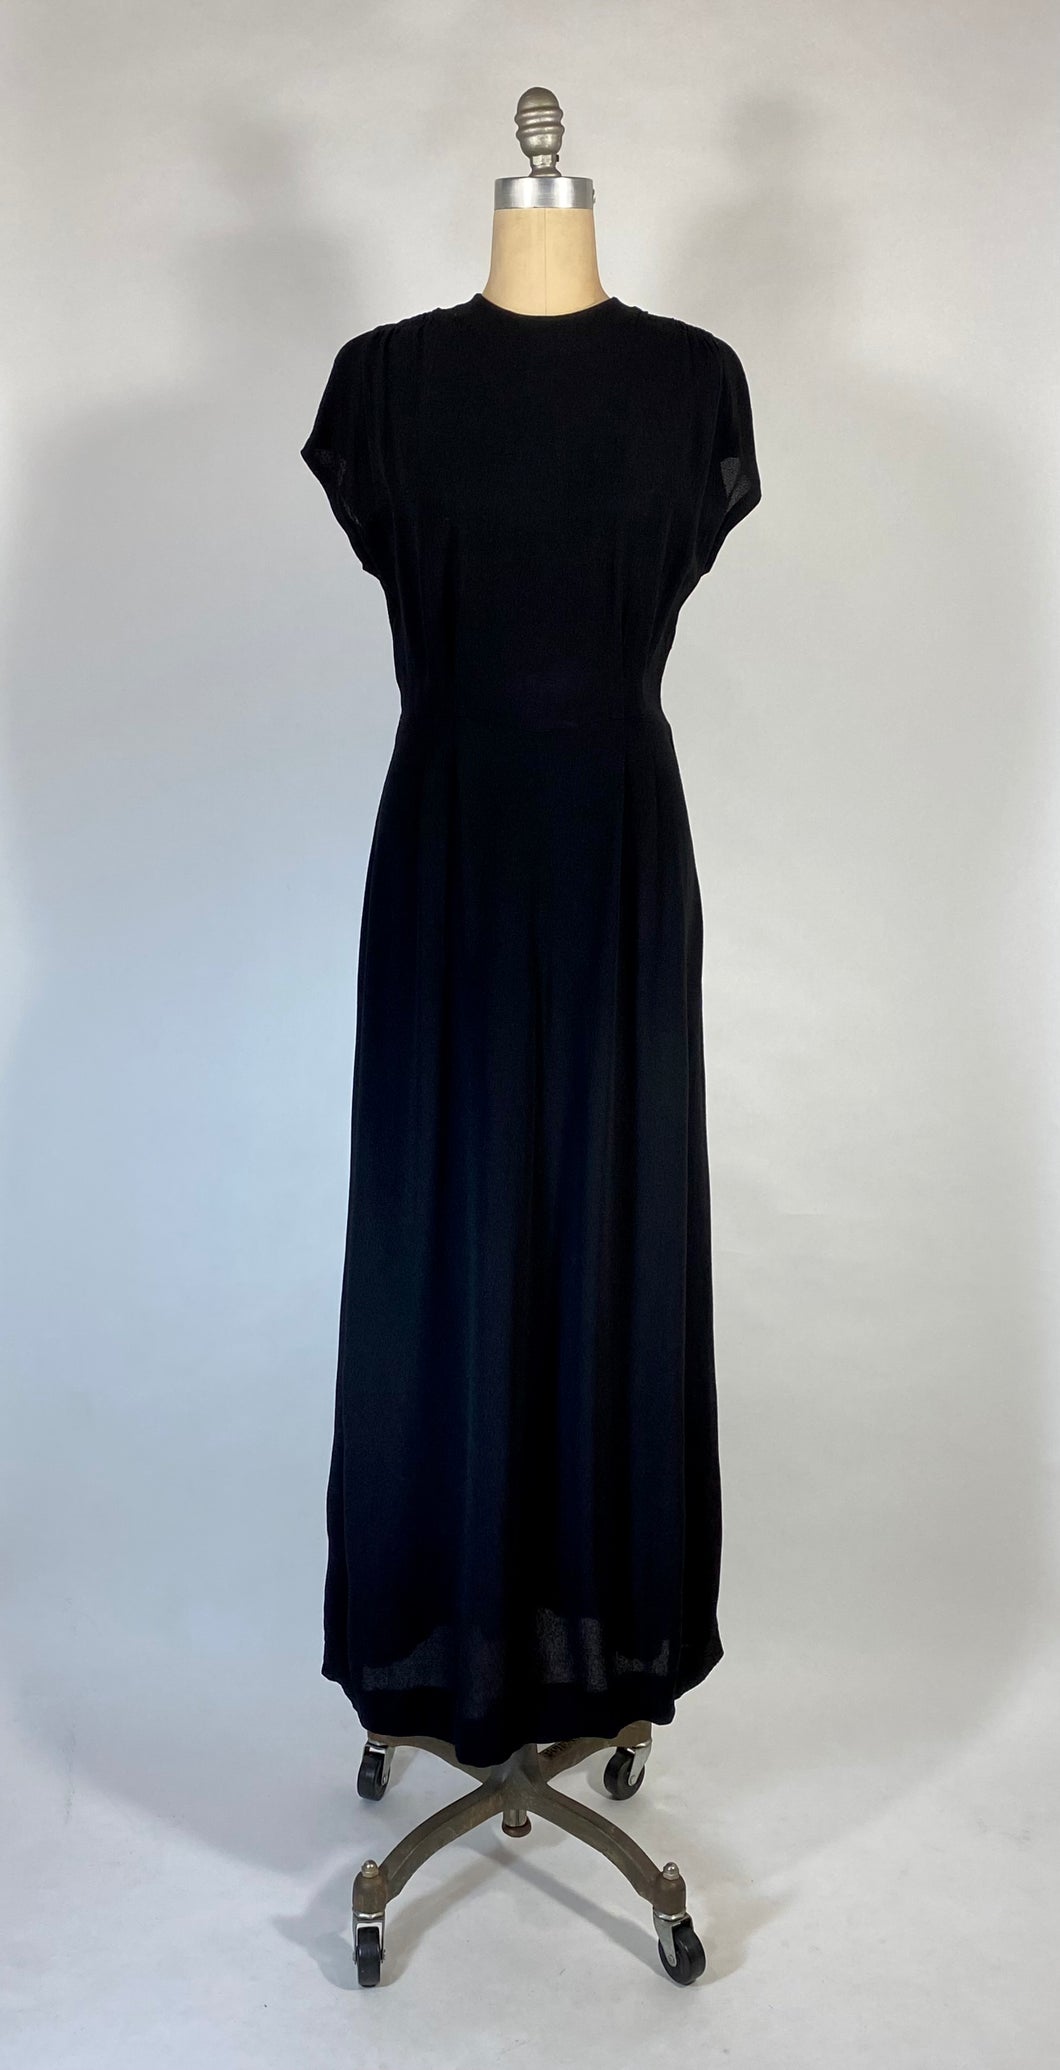 1930's-40's glam black wool crepe dress maxi gown w/ key hole back